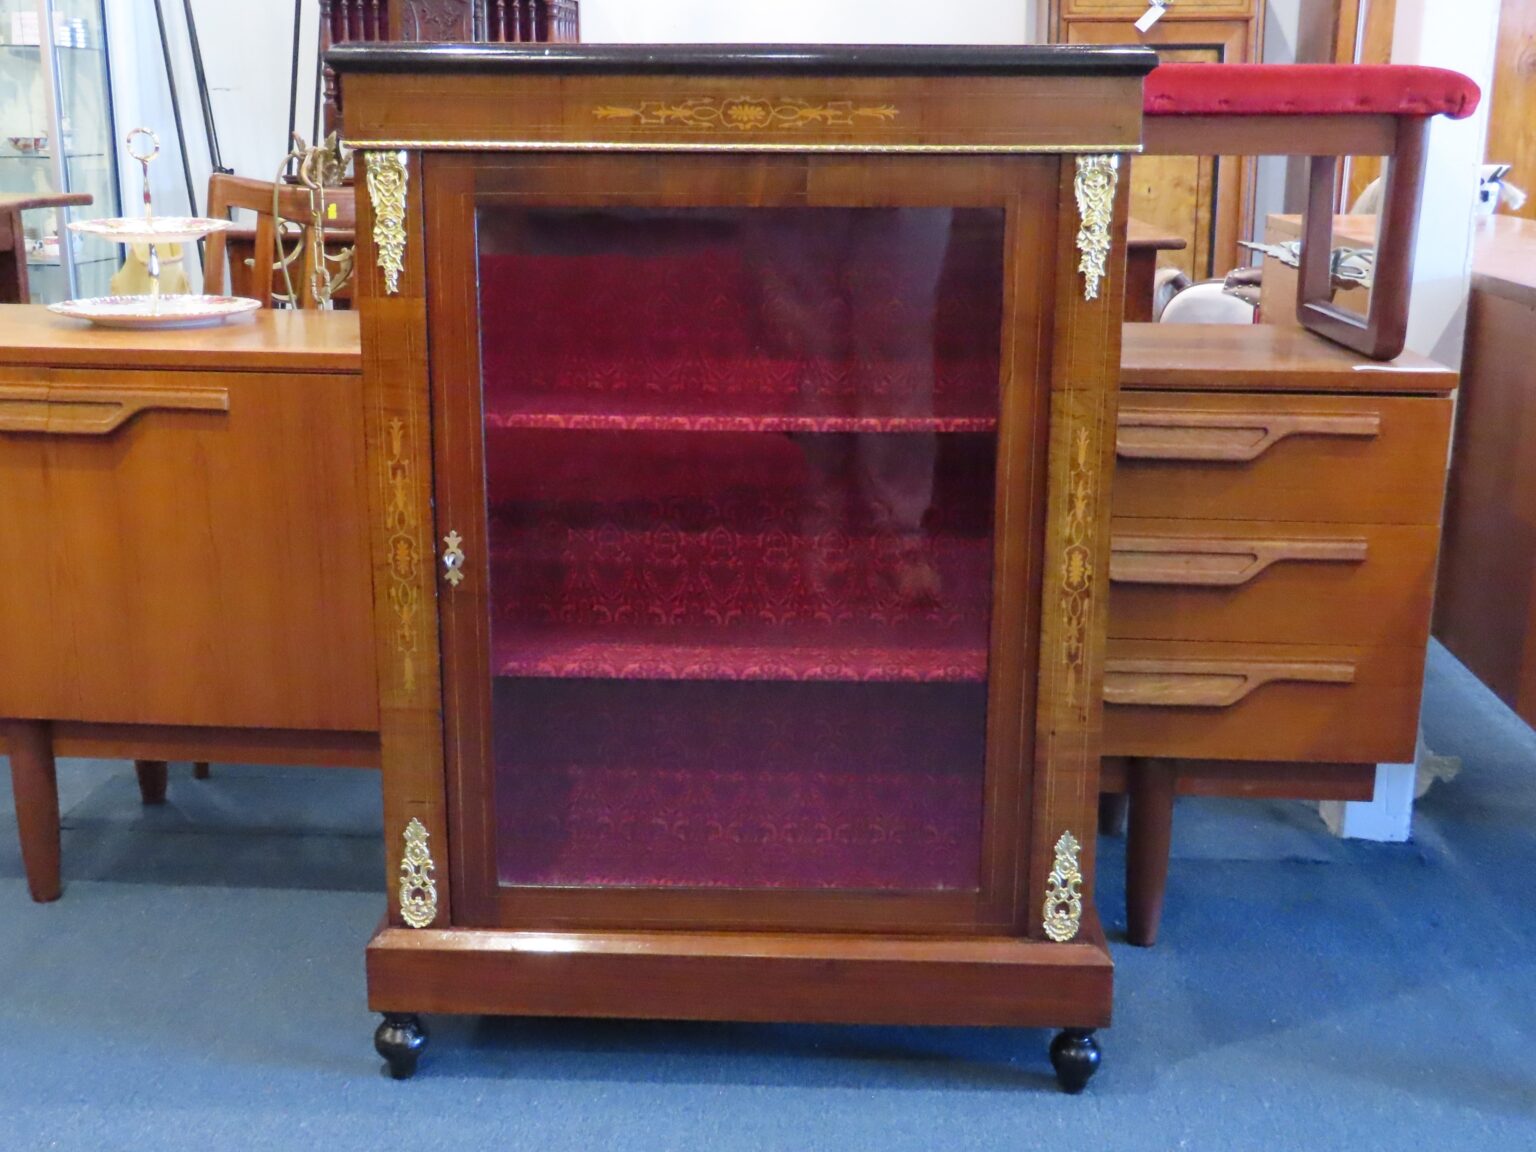 19th Century English Walnut Pier Cabinet with Ormolu fittings. Town and Country Antiques